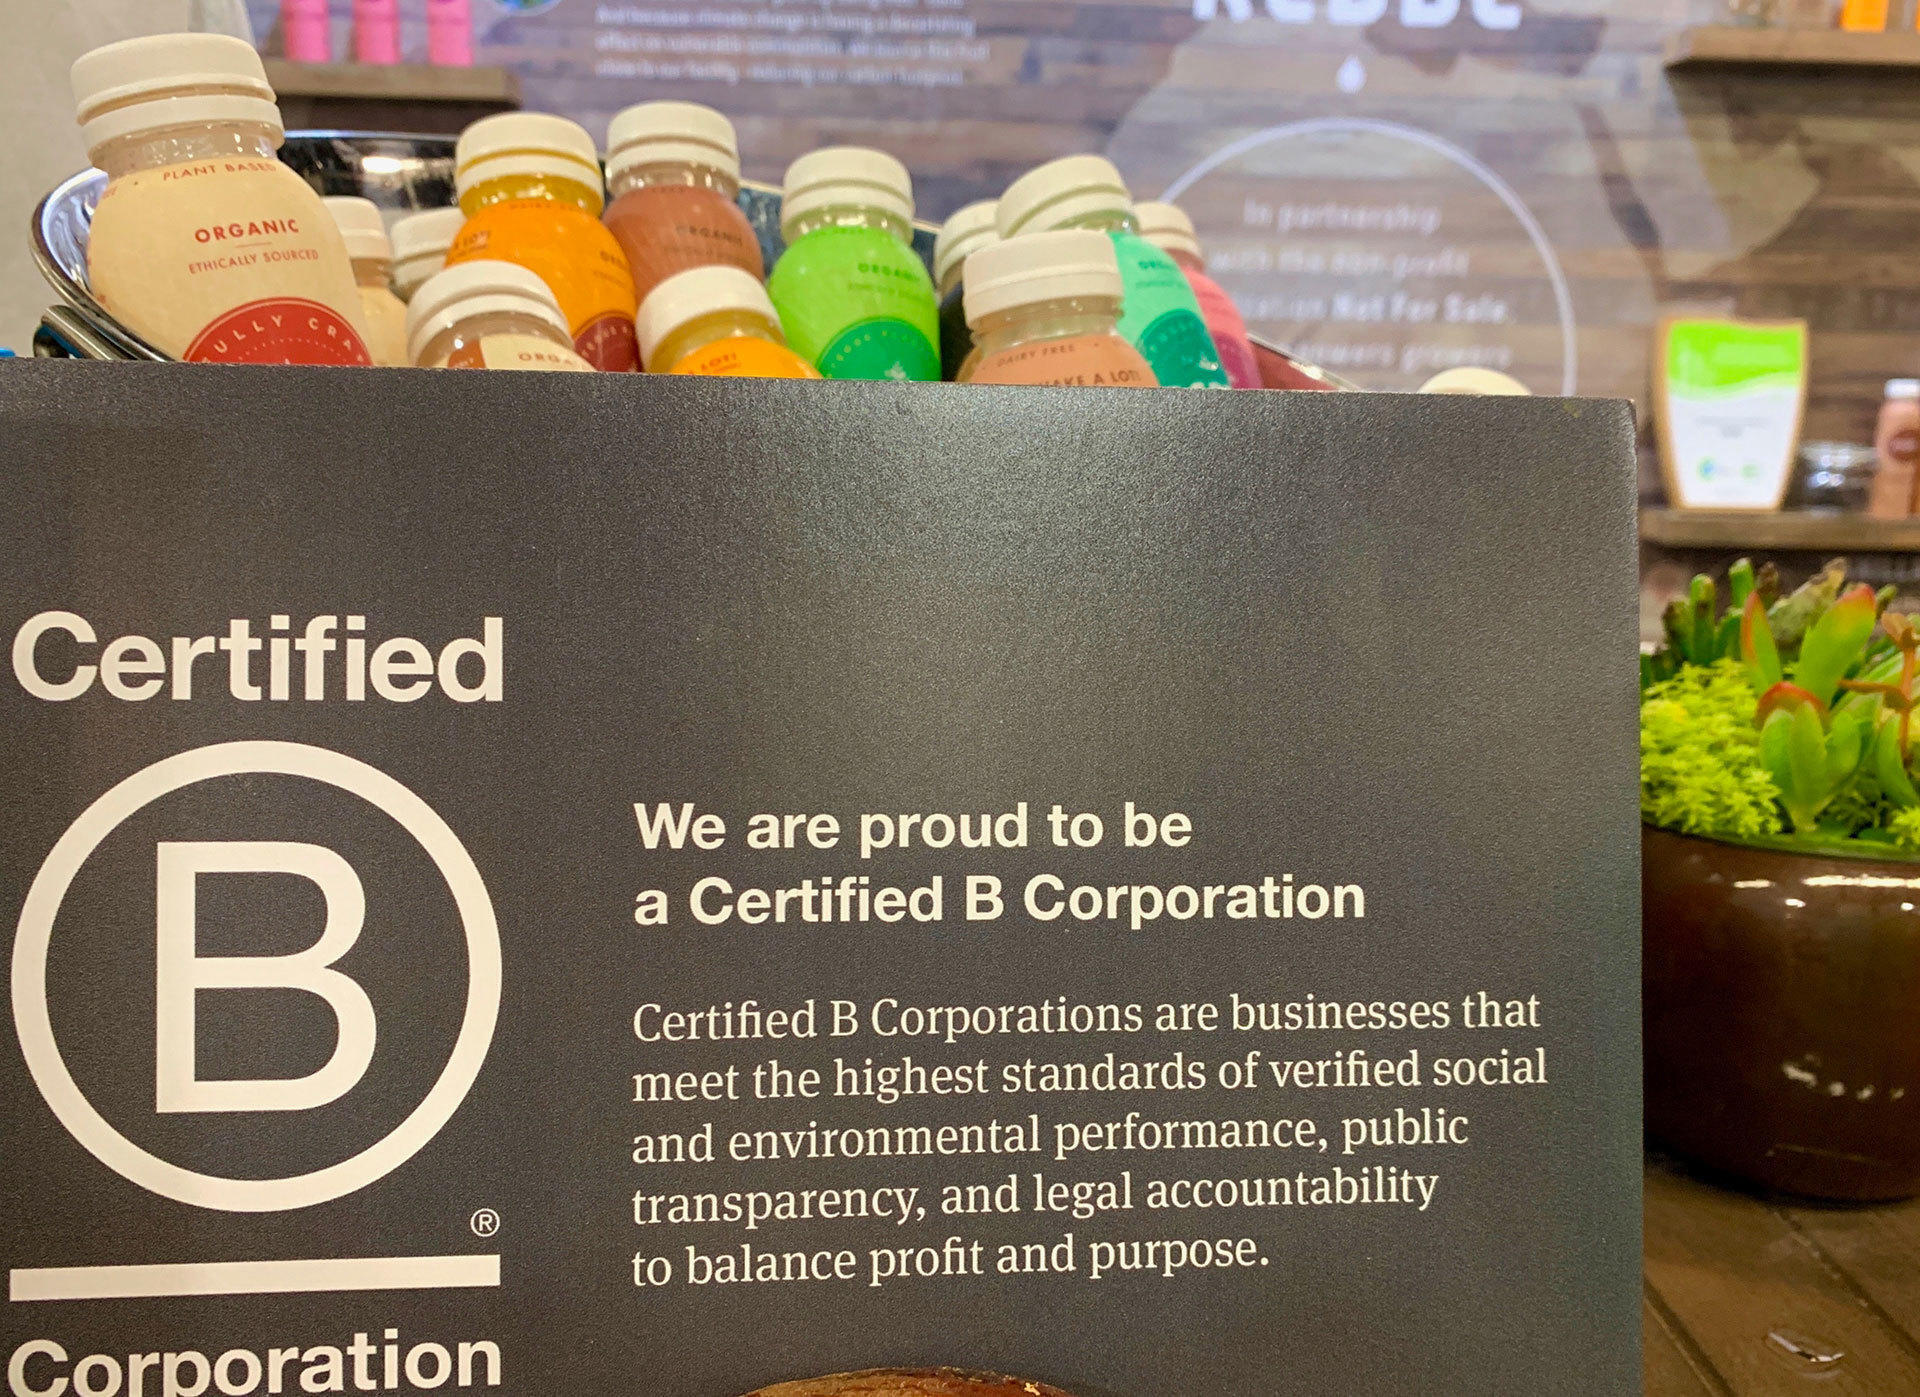 B Corp Dominance at Expo West 2019